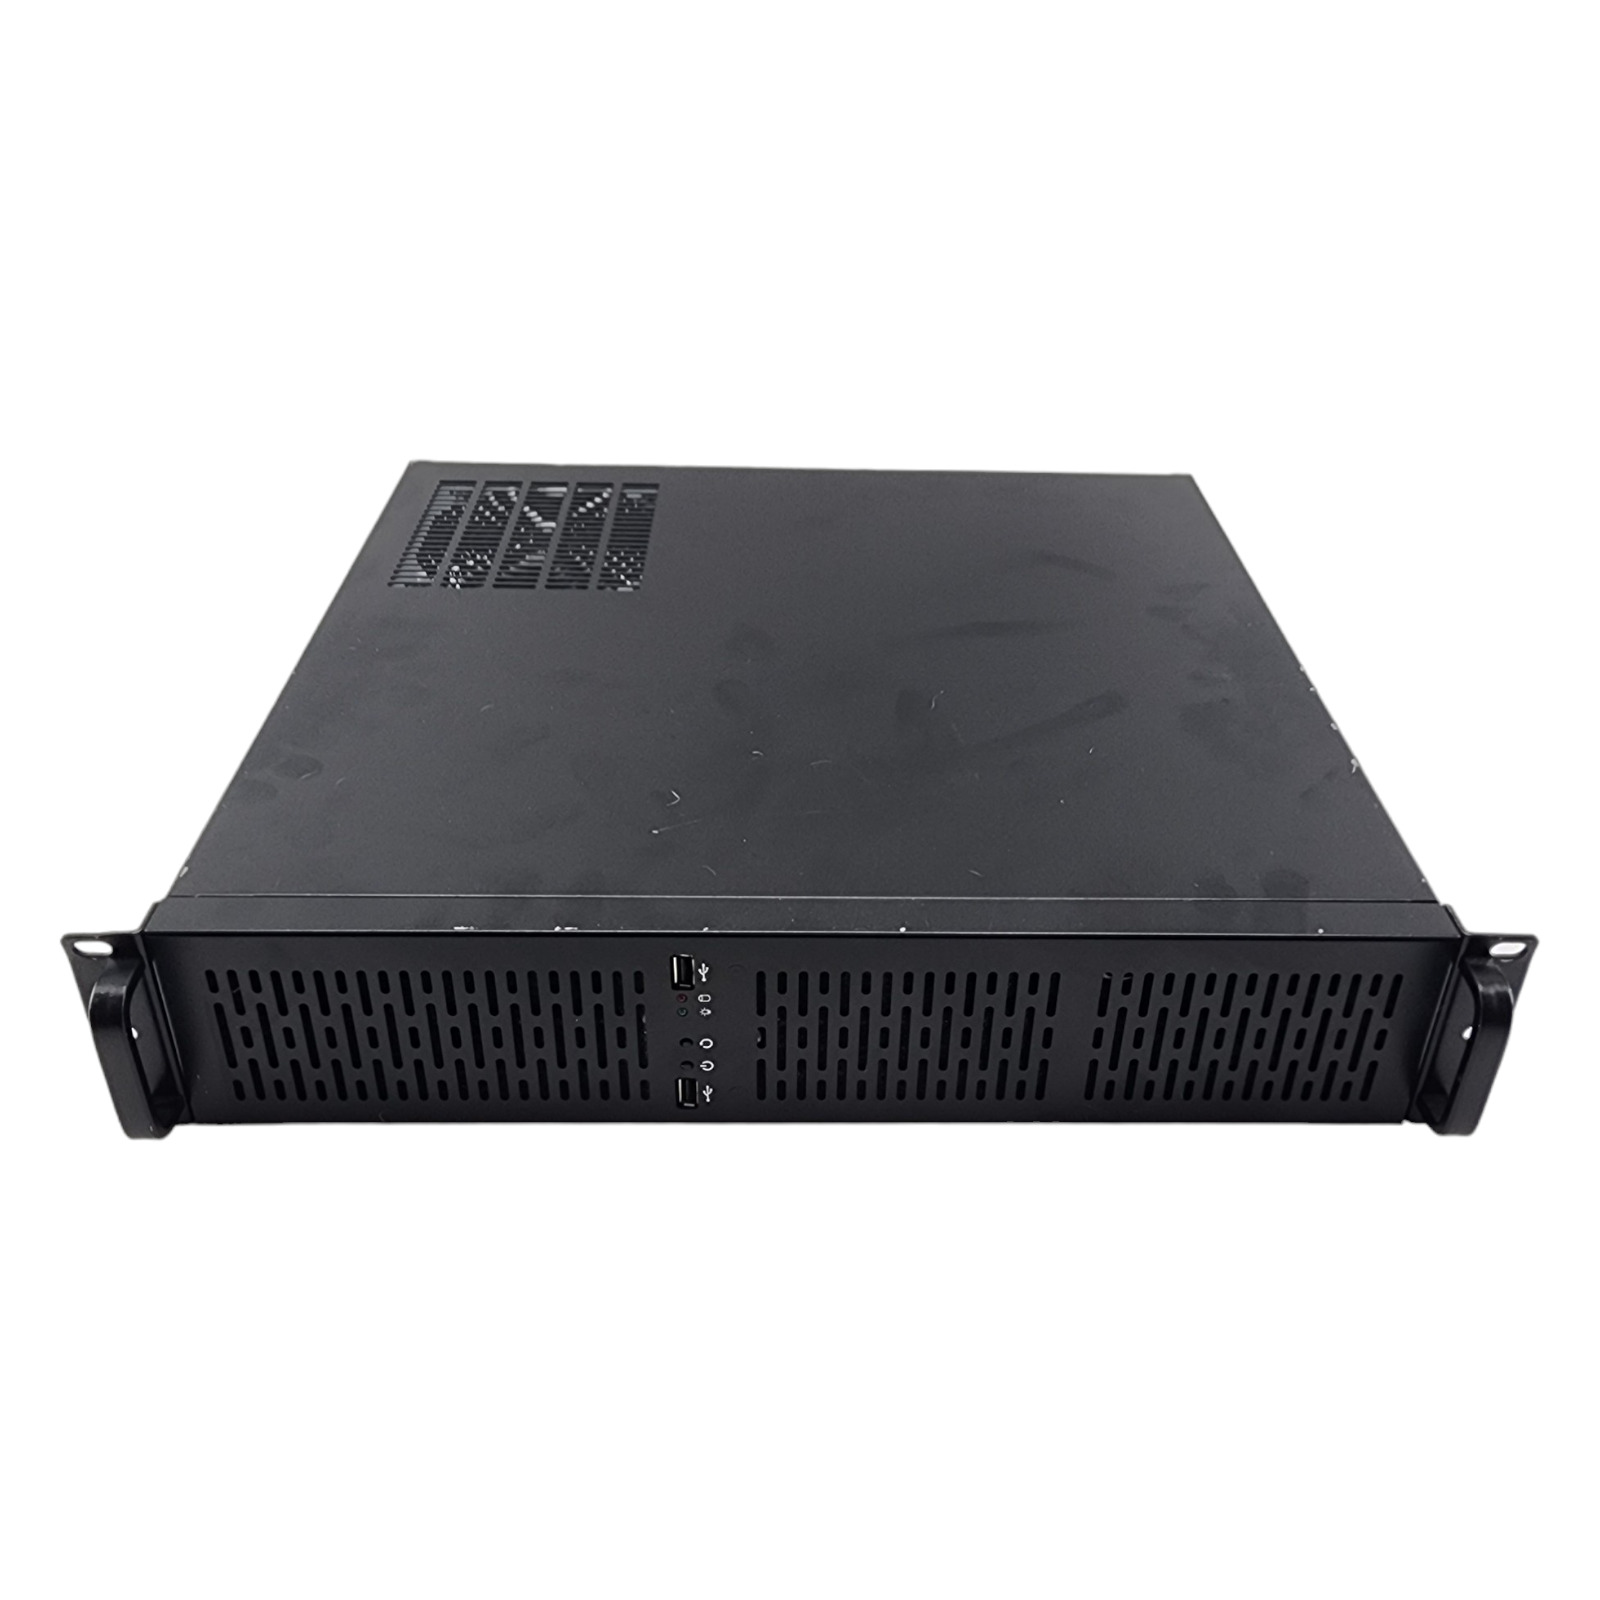 Rosewill 2U Server Chassis Rack Mount Case - See Photos